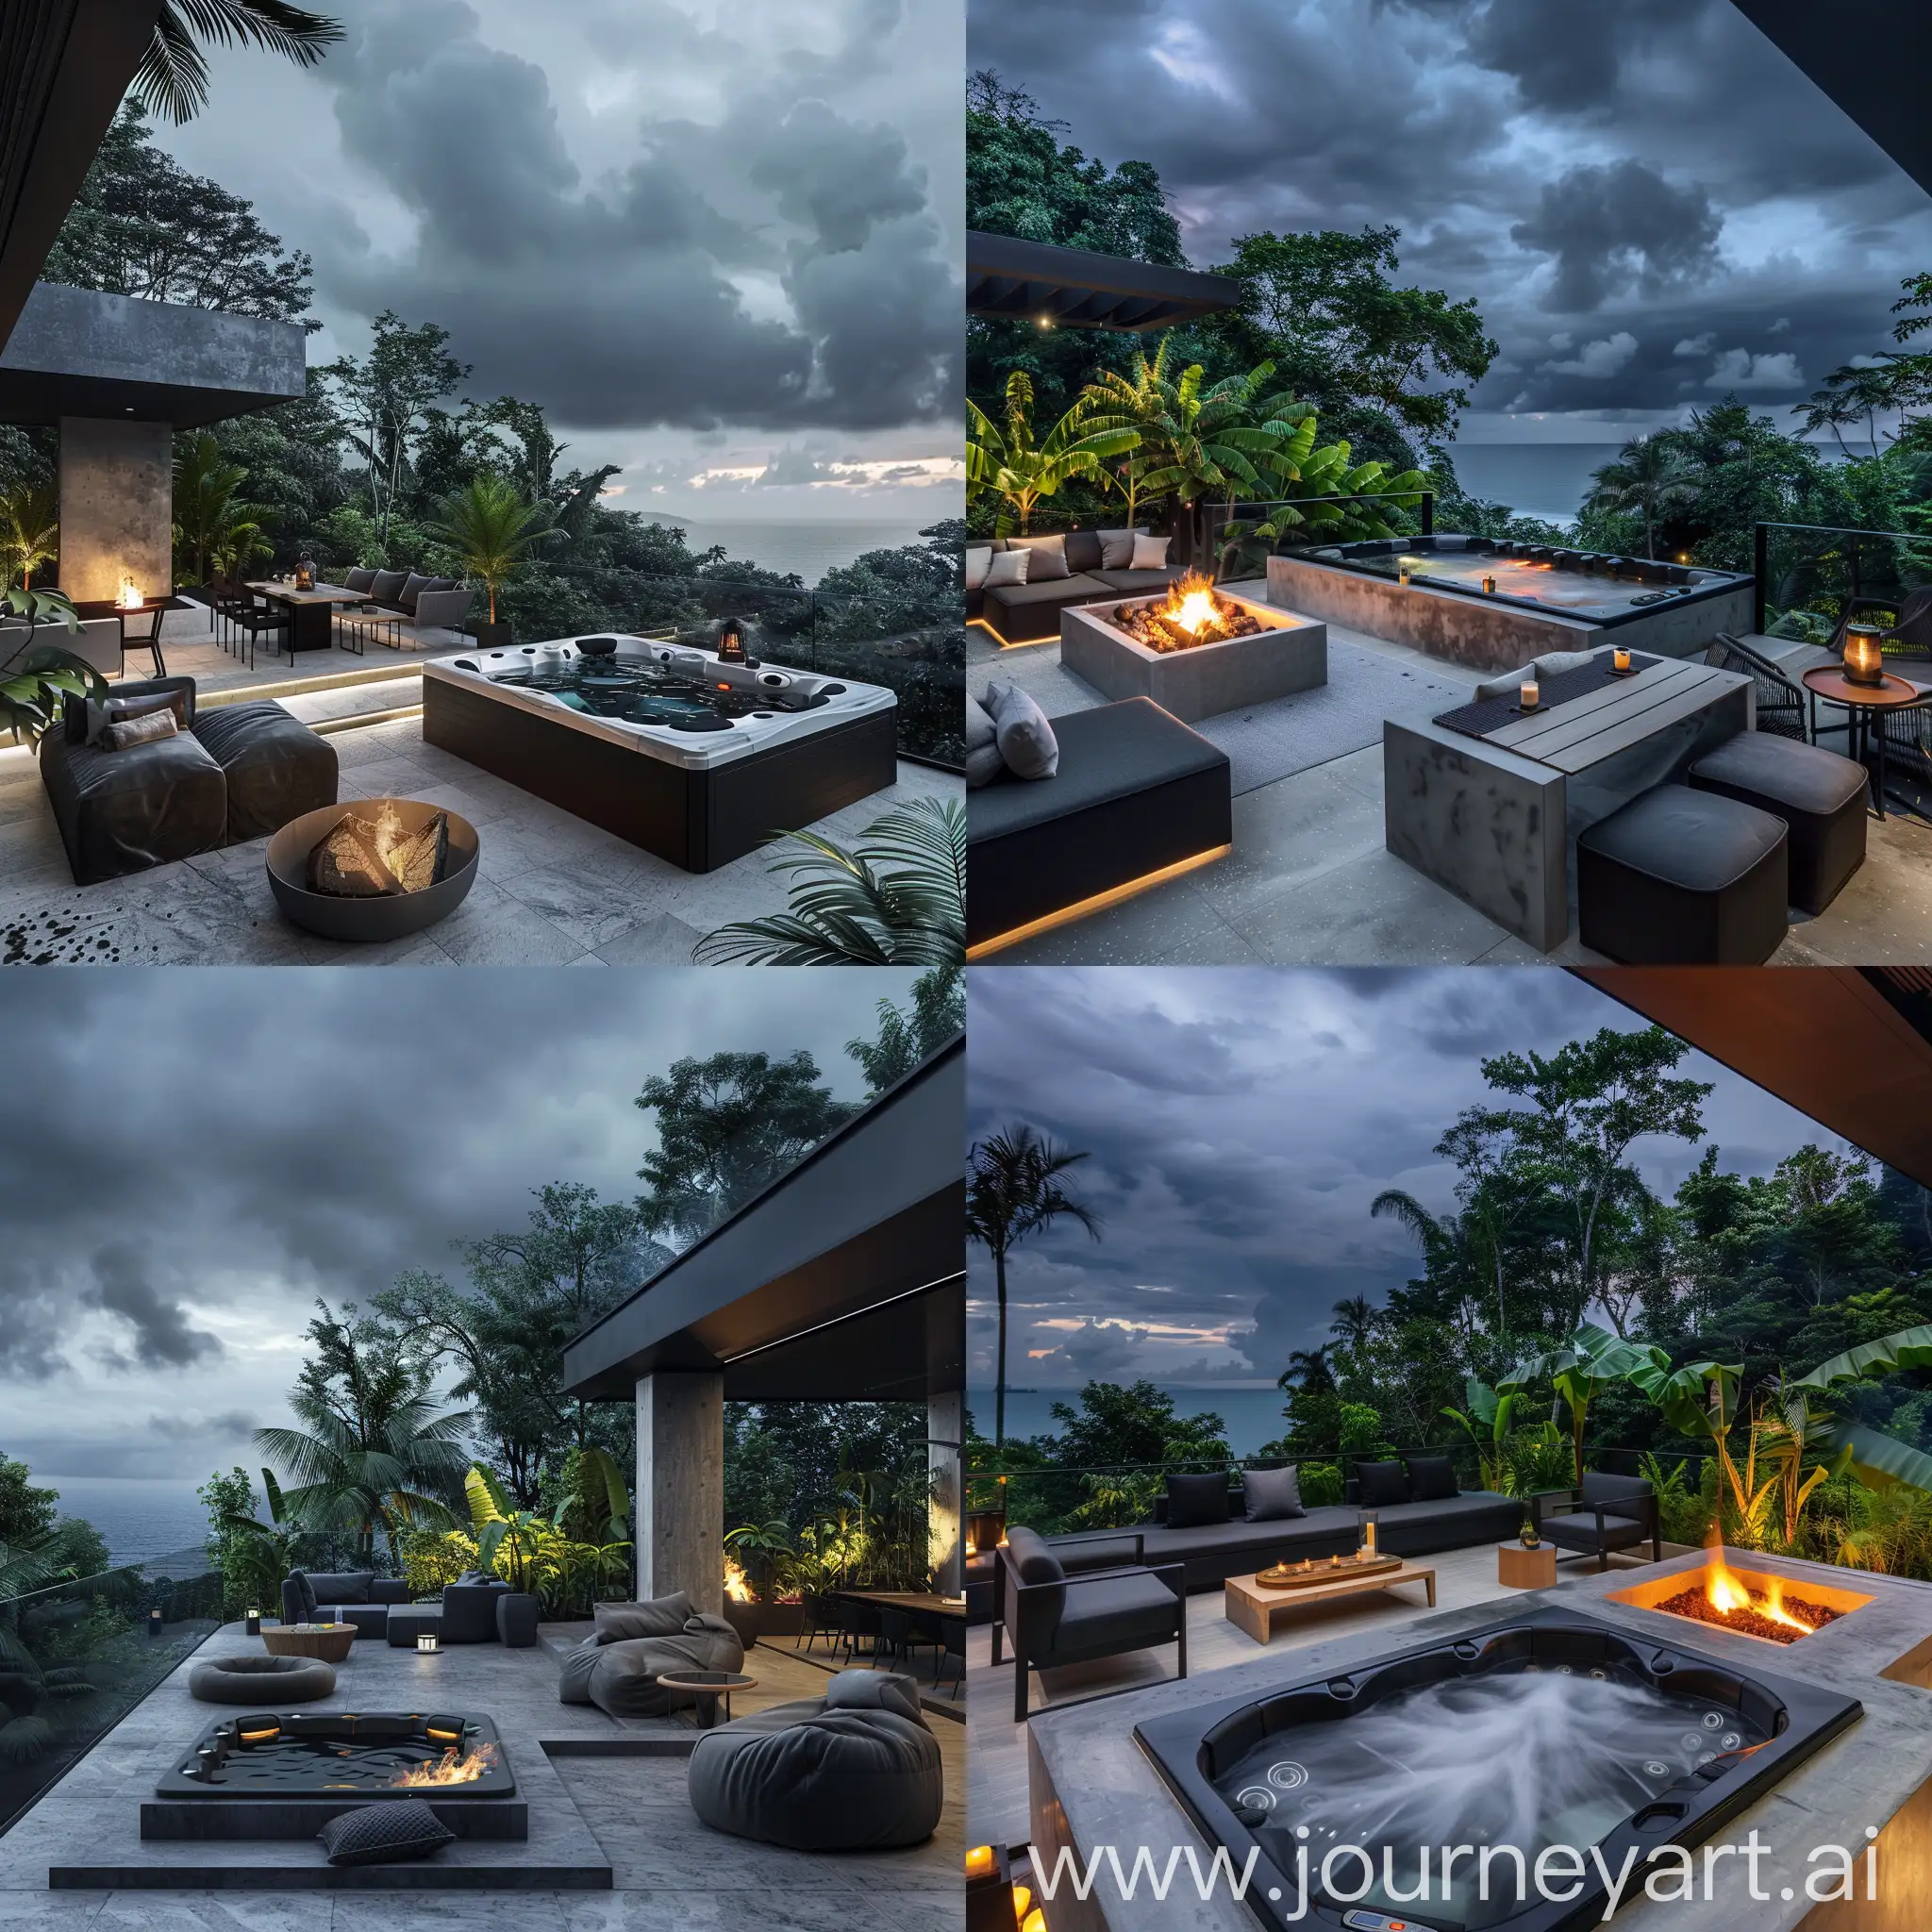 modern terrace with black, gray and concrete colors and a jacuzzi with a complete arrangement of furniture, decorated and soft lighting, a fire pit and a table.
In lush tropical forest with broad-leaved trees and sea, heavy cloudy sky at night, real photo.